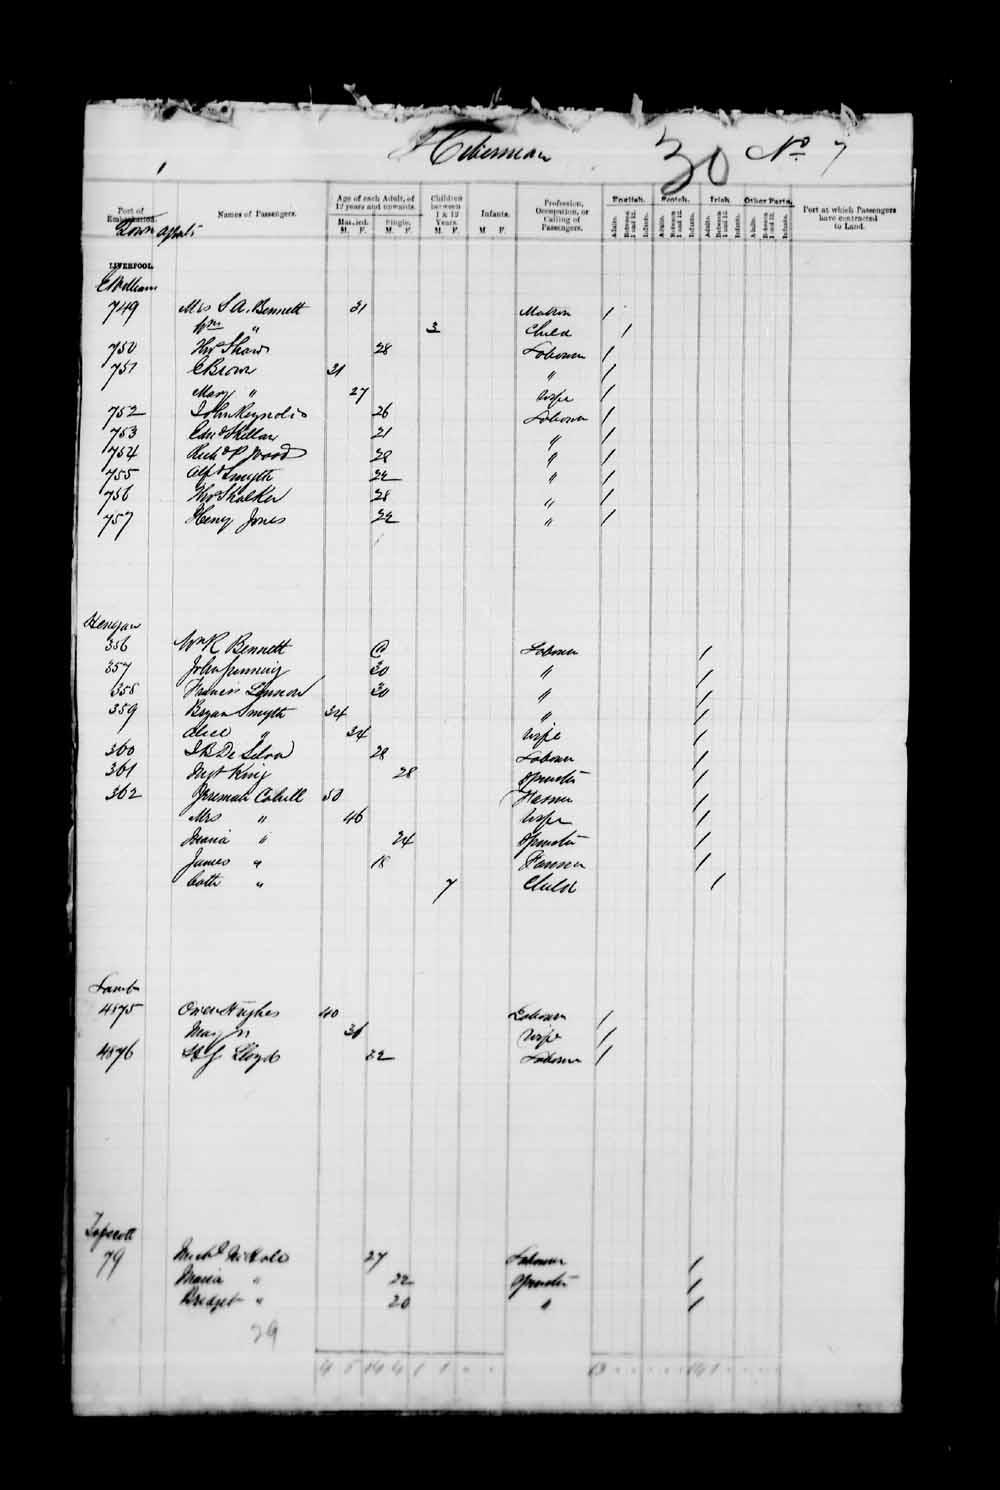 Digitized page of Passenger Lists for Image No.: e003530477